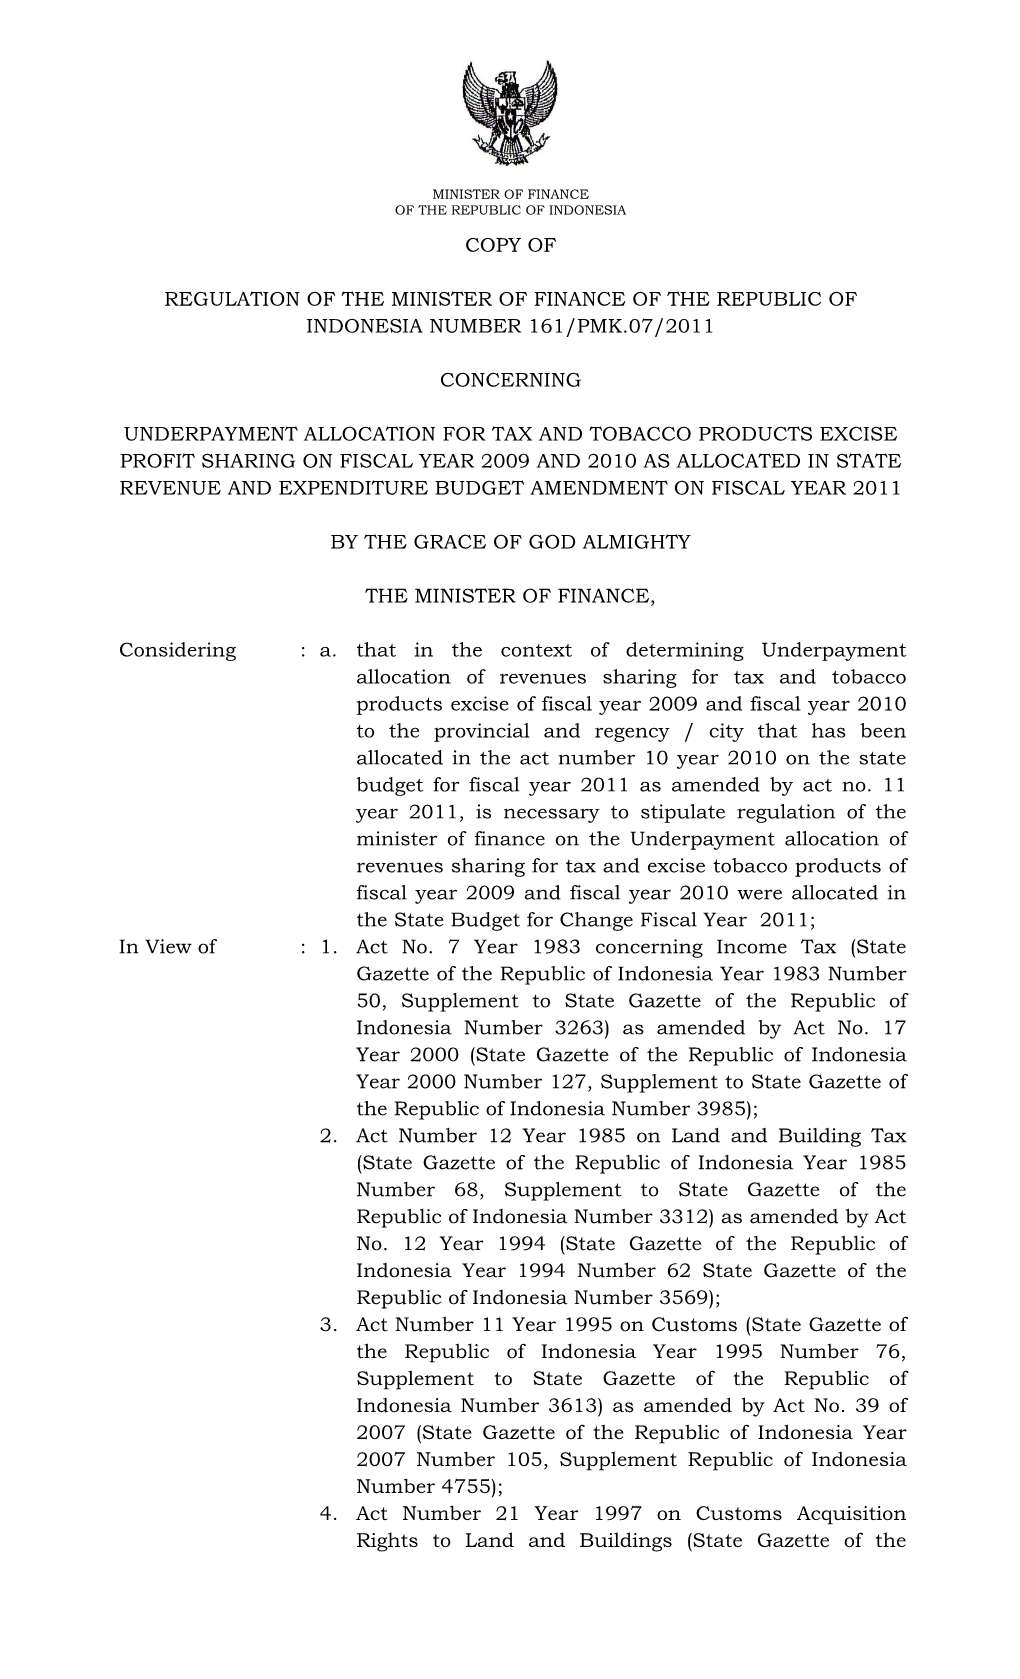 Copy of Regulation of the Minister of Finance of The